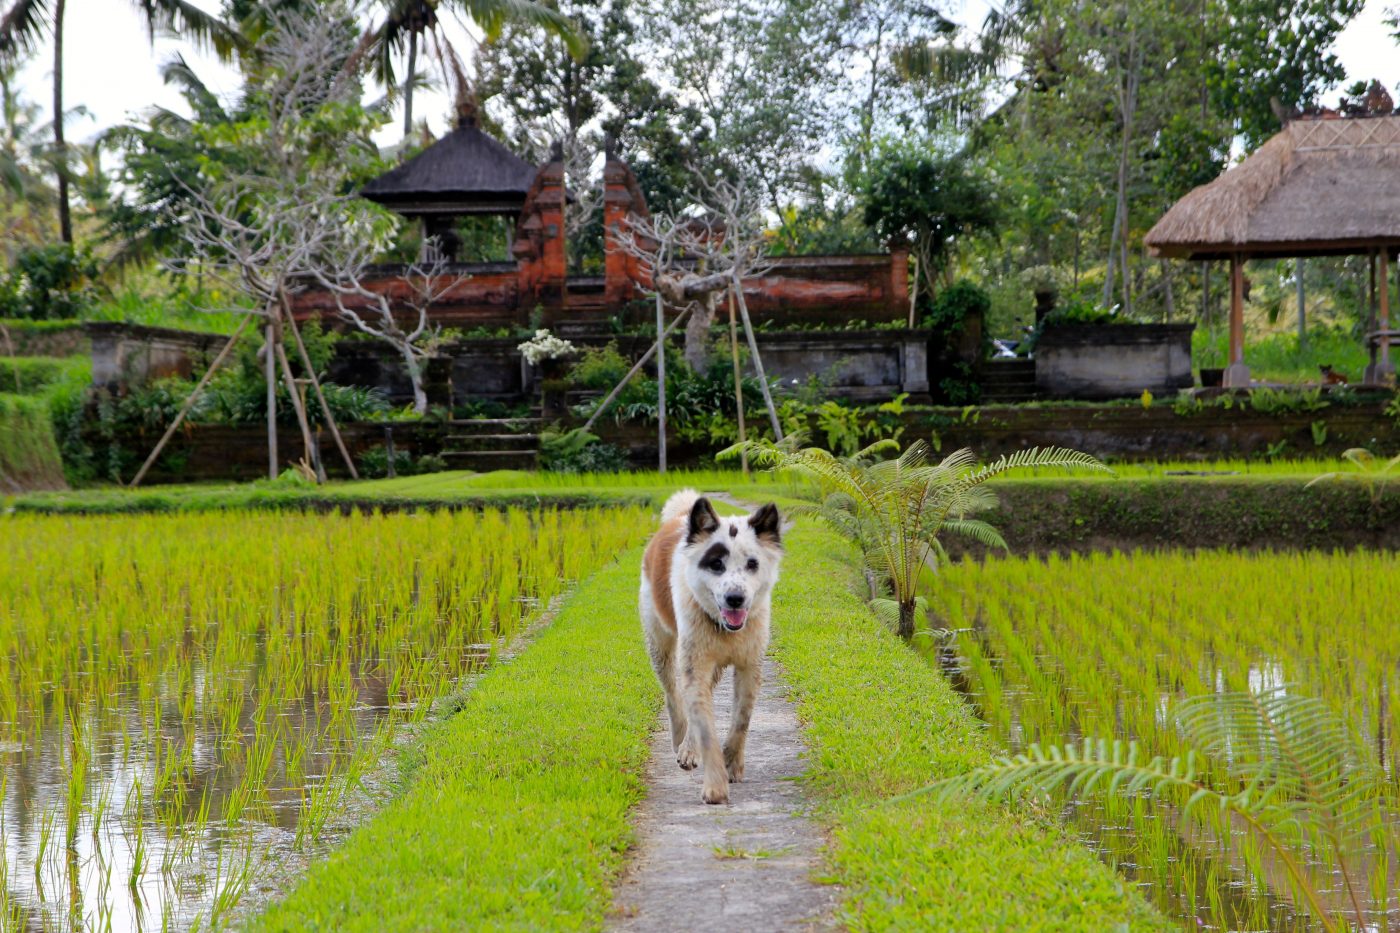 Travel to Indonesia - Balinese farm